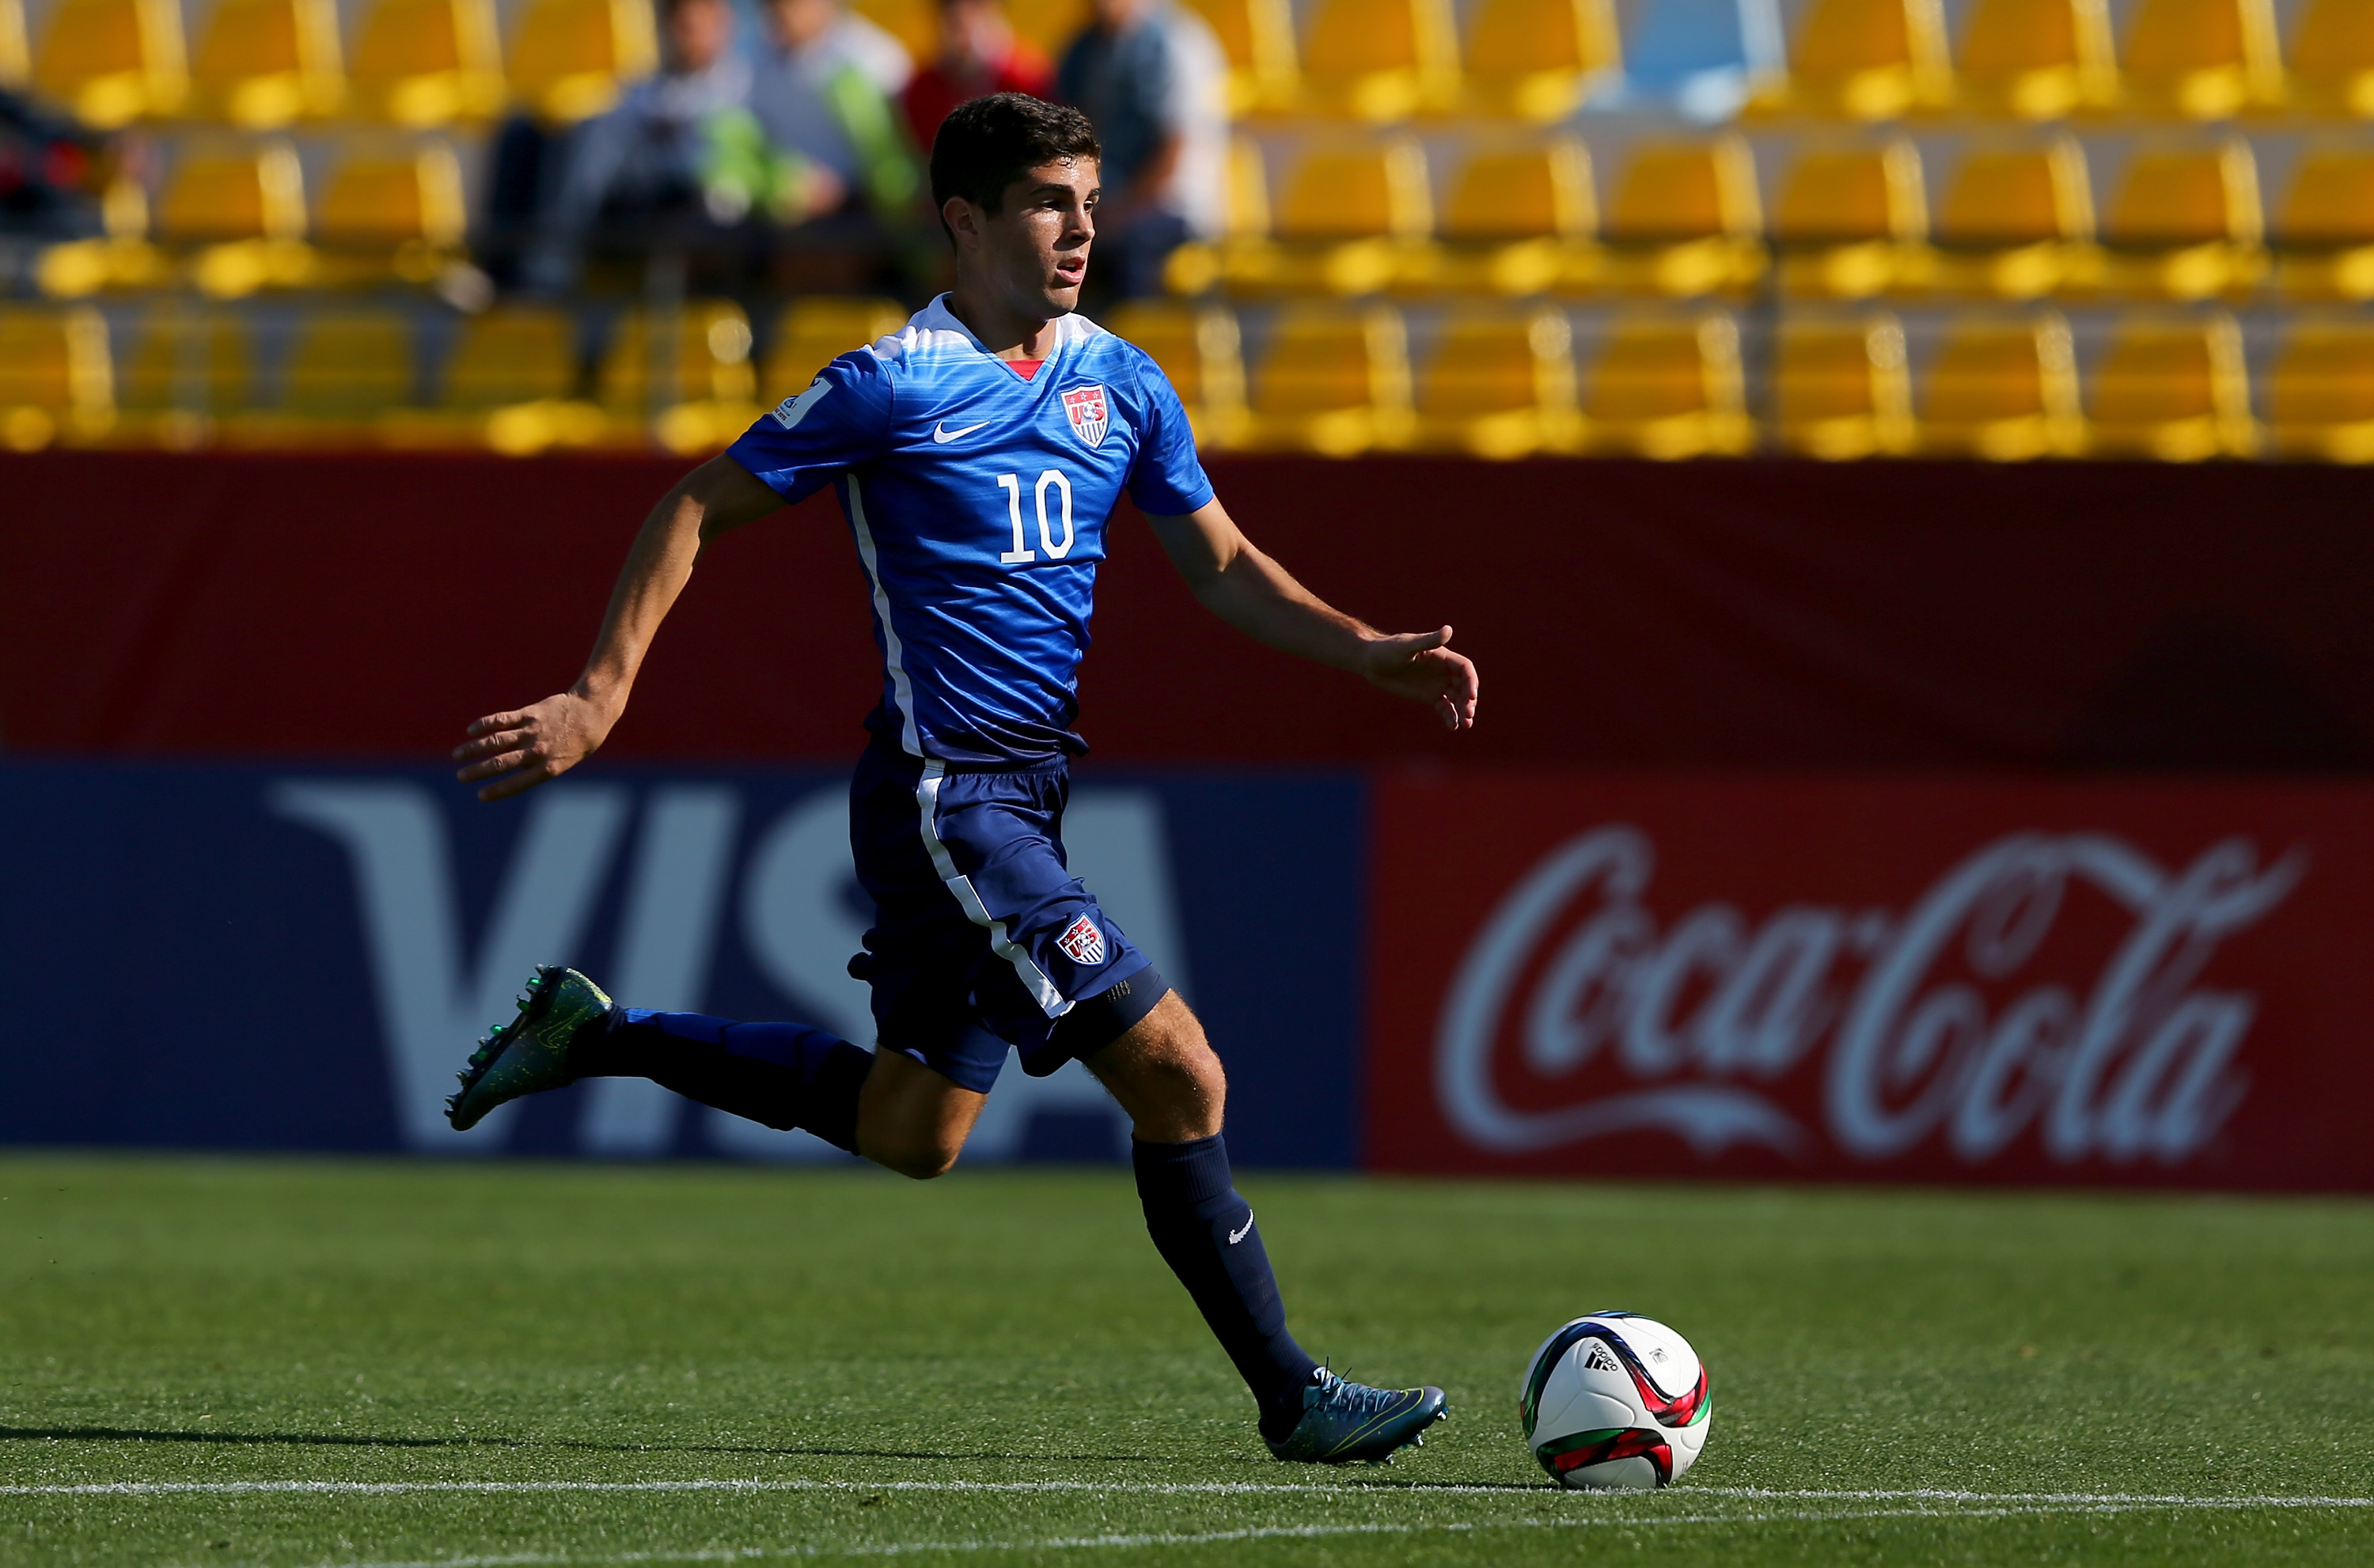 Soccer star Christian Pulisic in 2015